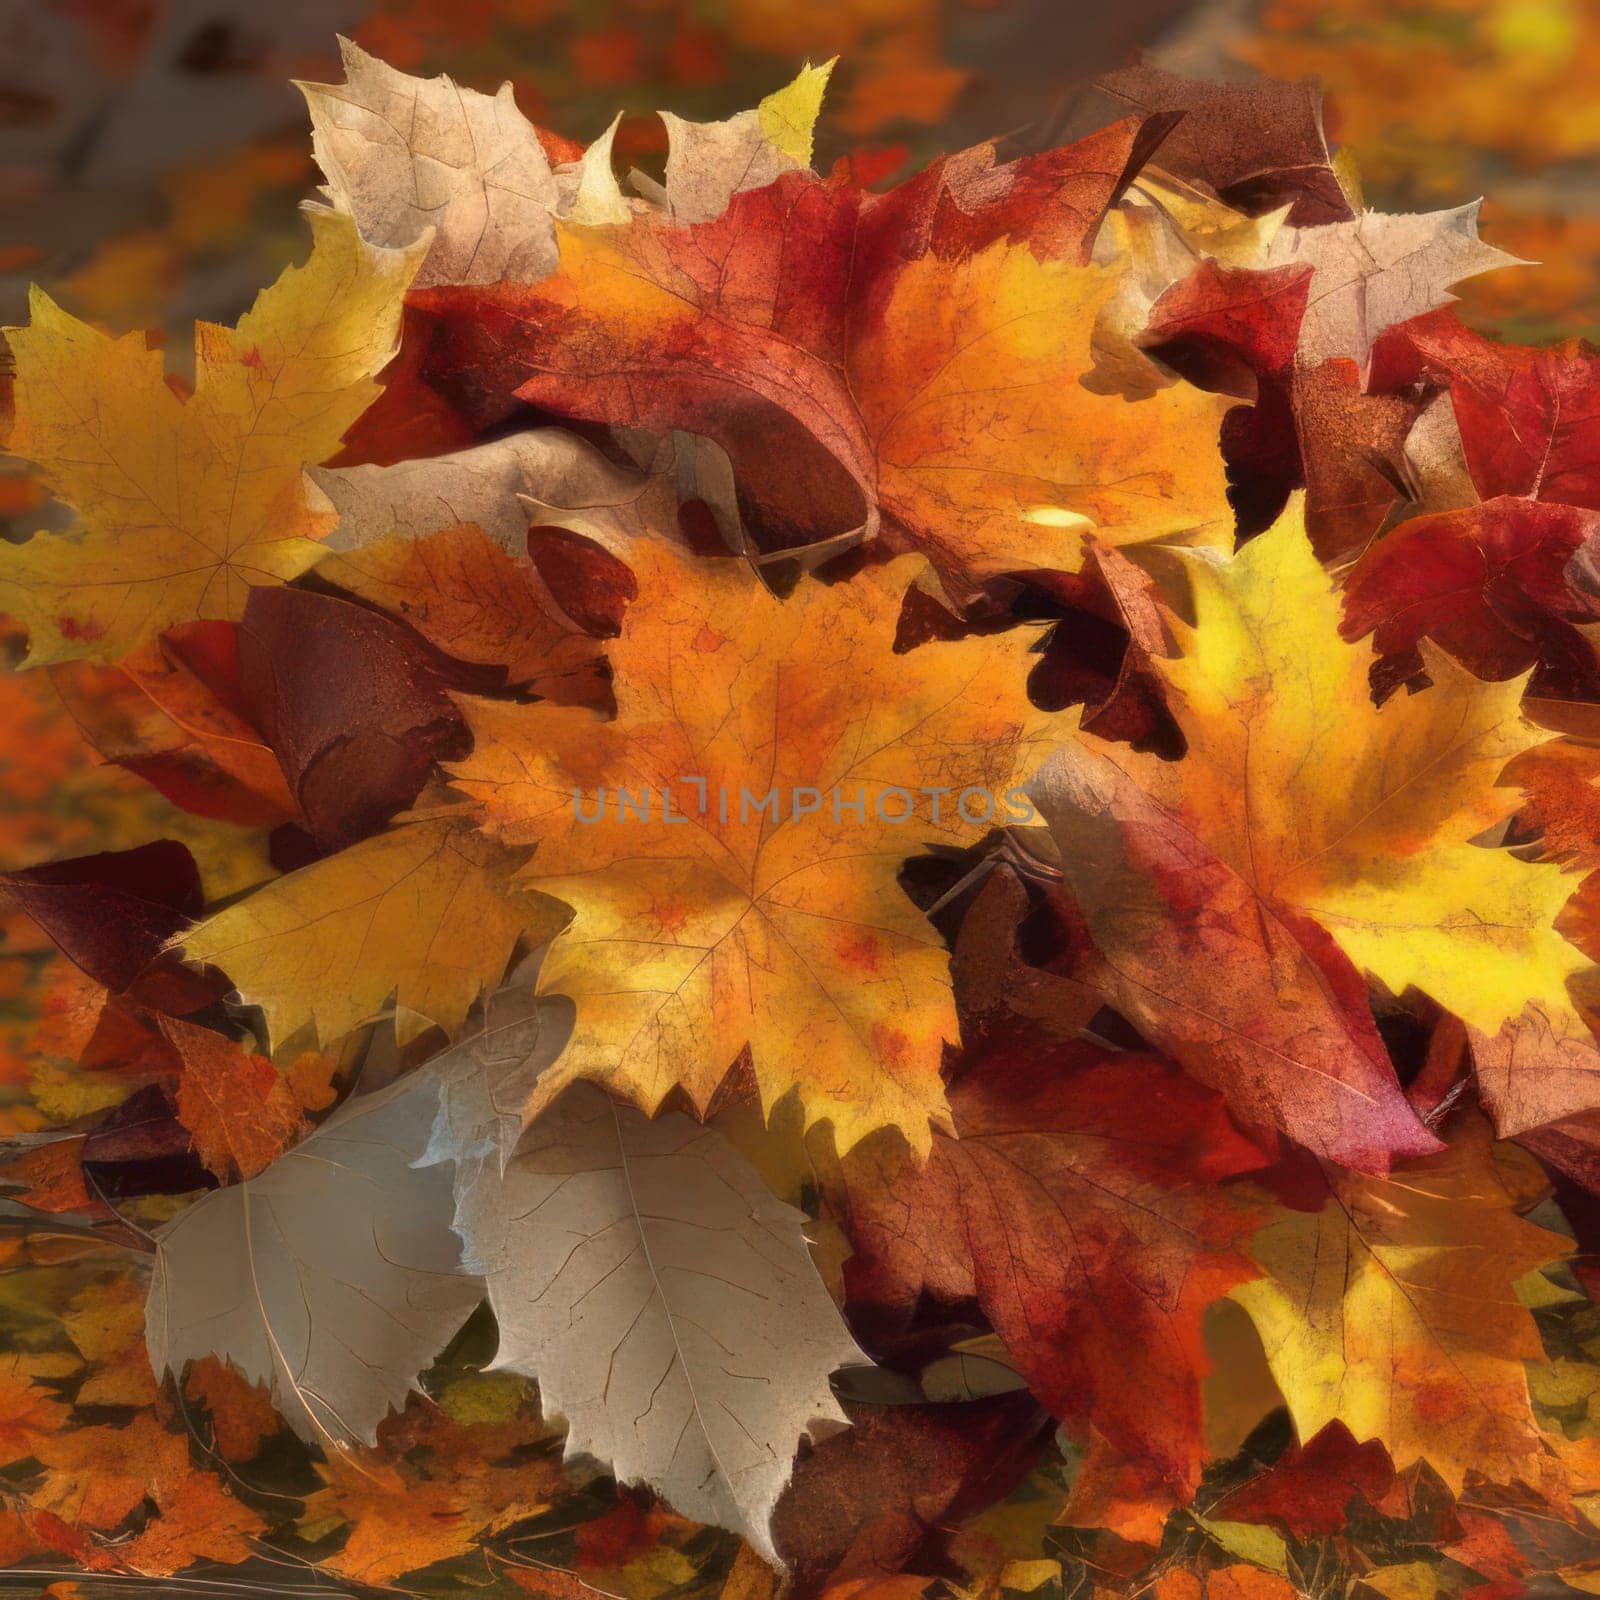 Autumn leaves. Image created by AI